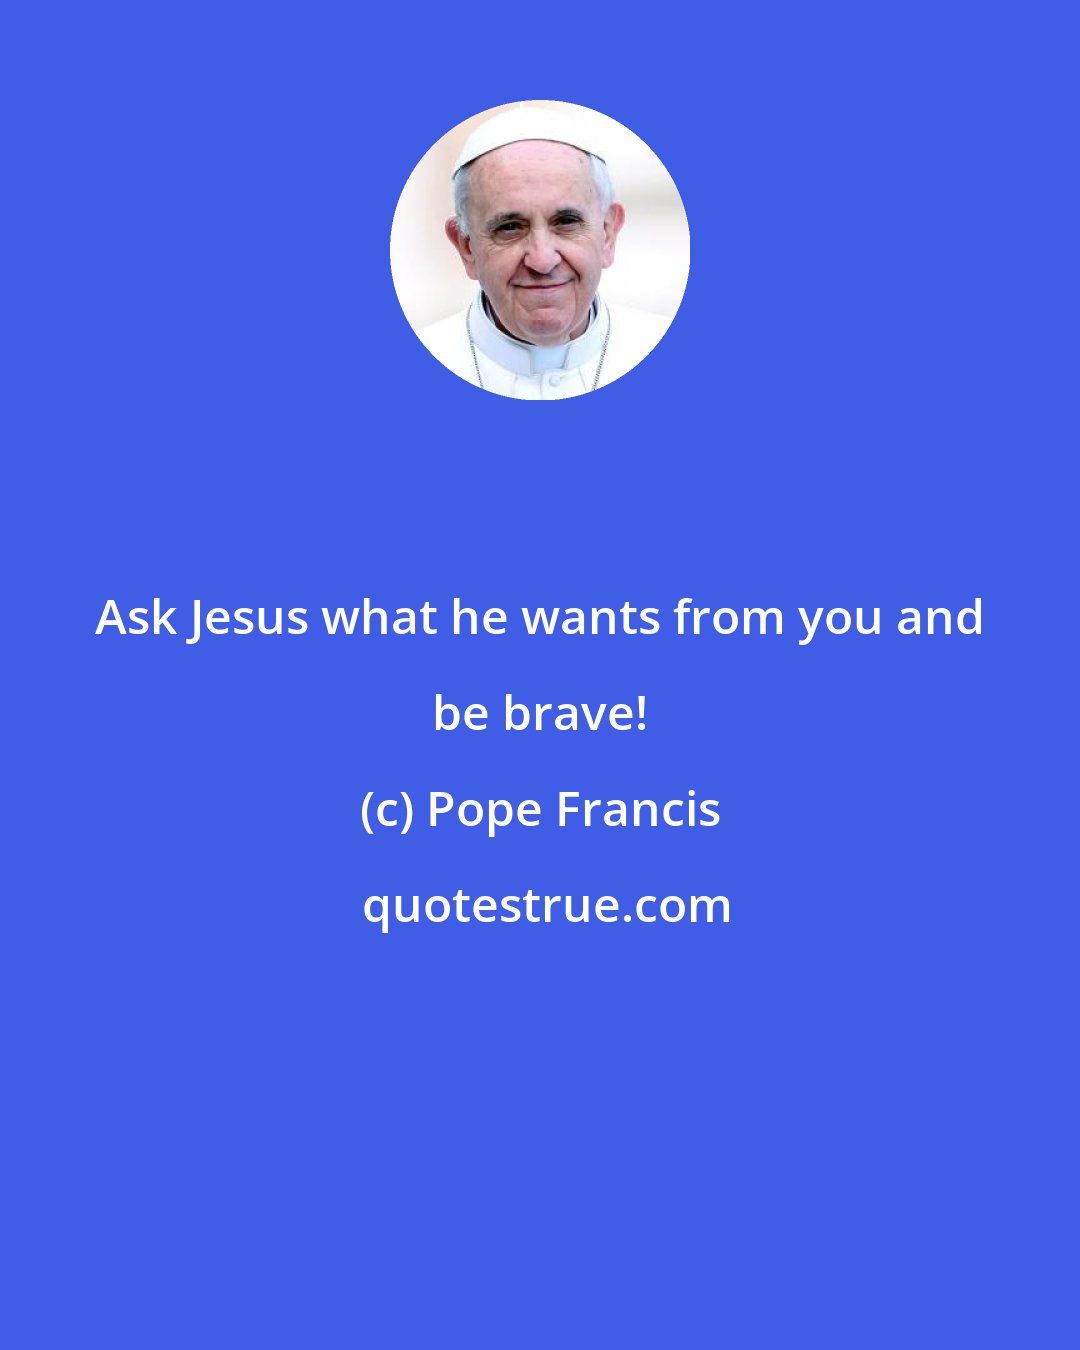 Pope Francis: Ask Jesus what he wants from you and be brave!